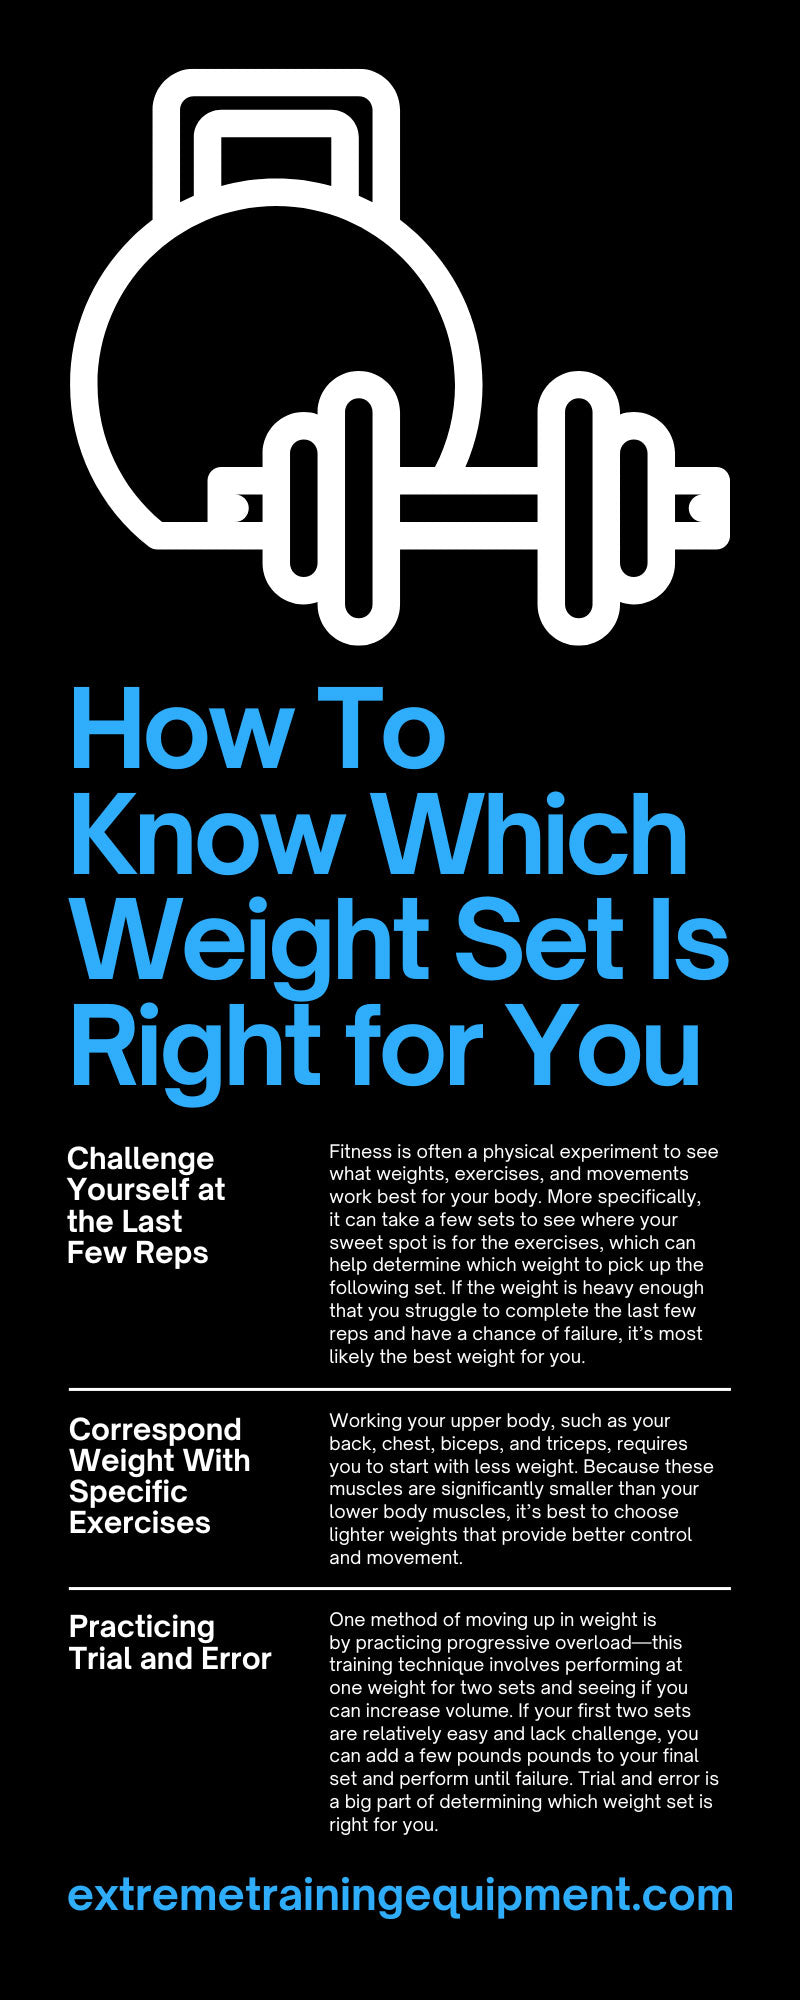 How To Know Which Weight Set Is Right for You